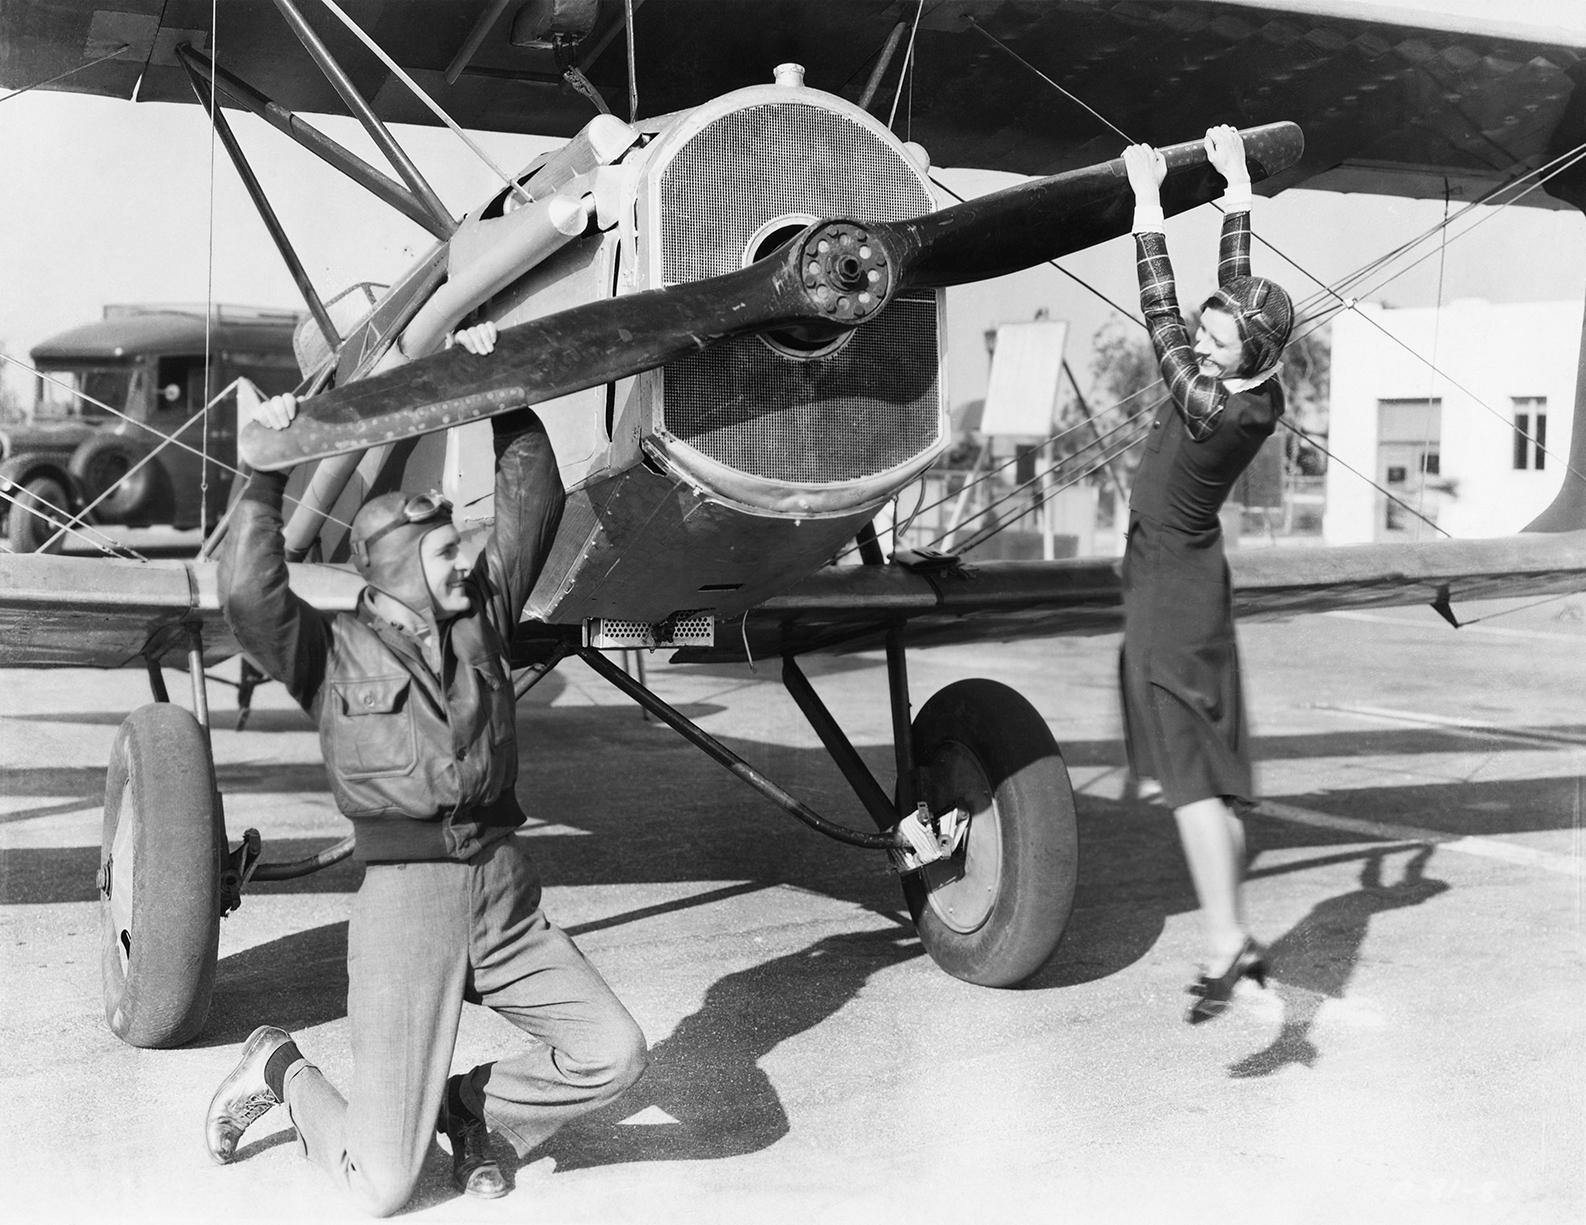 a man and a woman play with a plane propeller